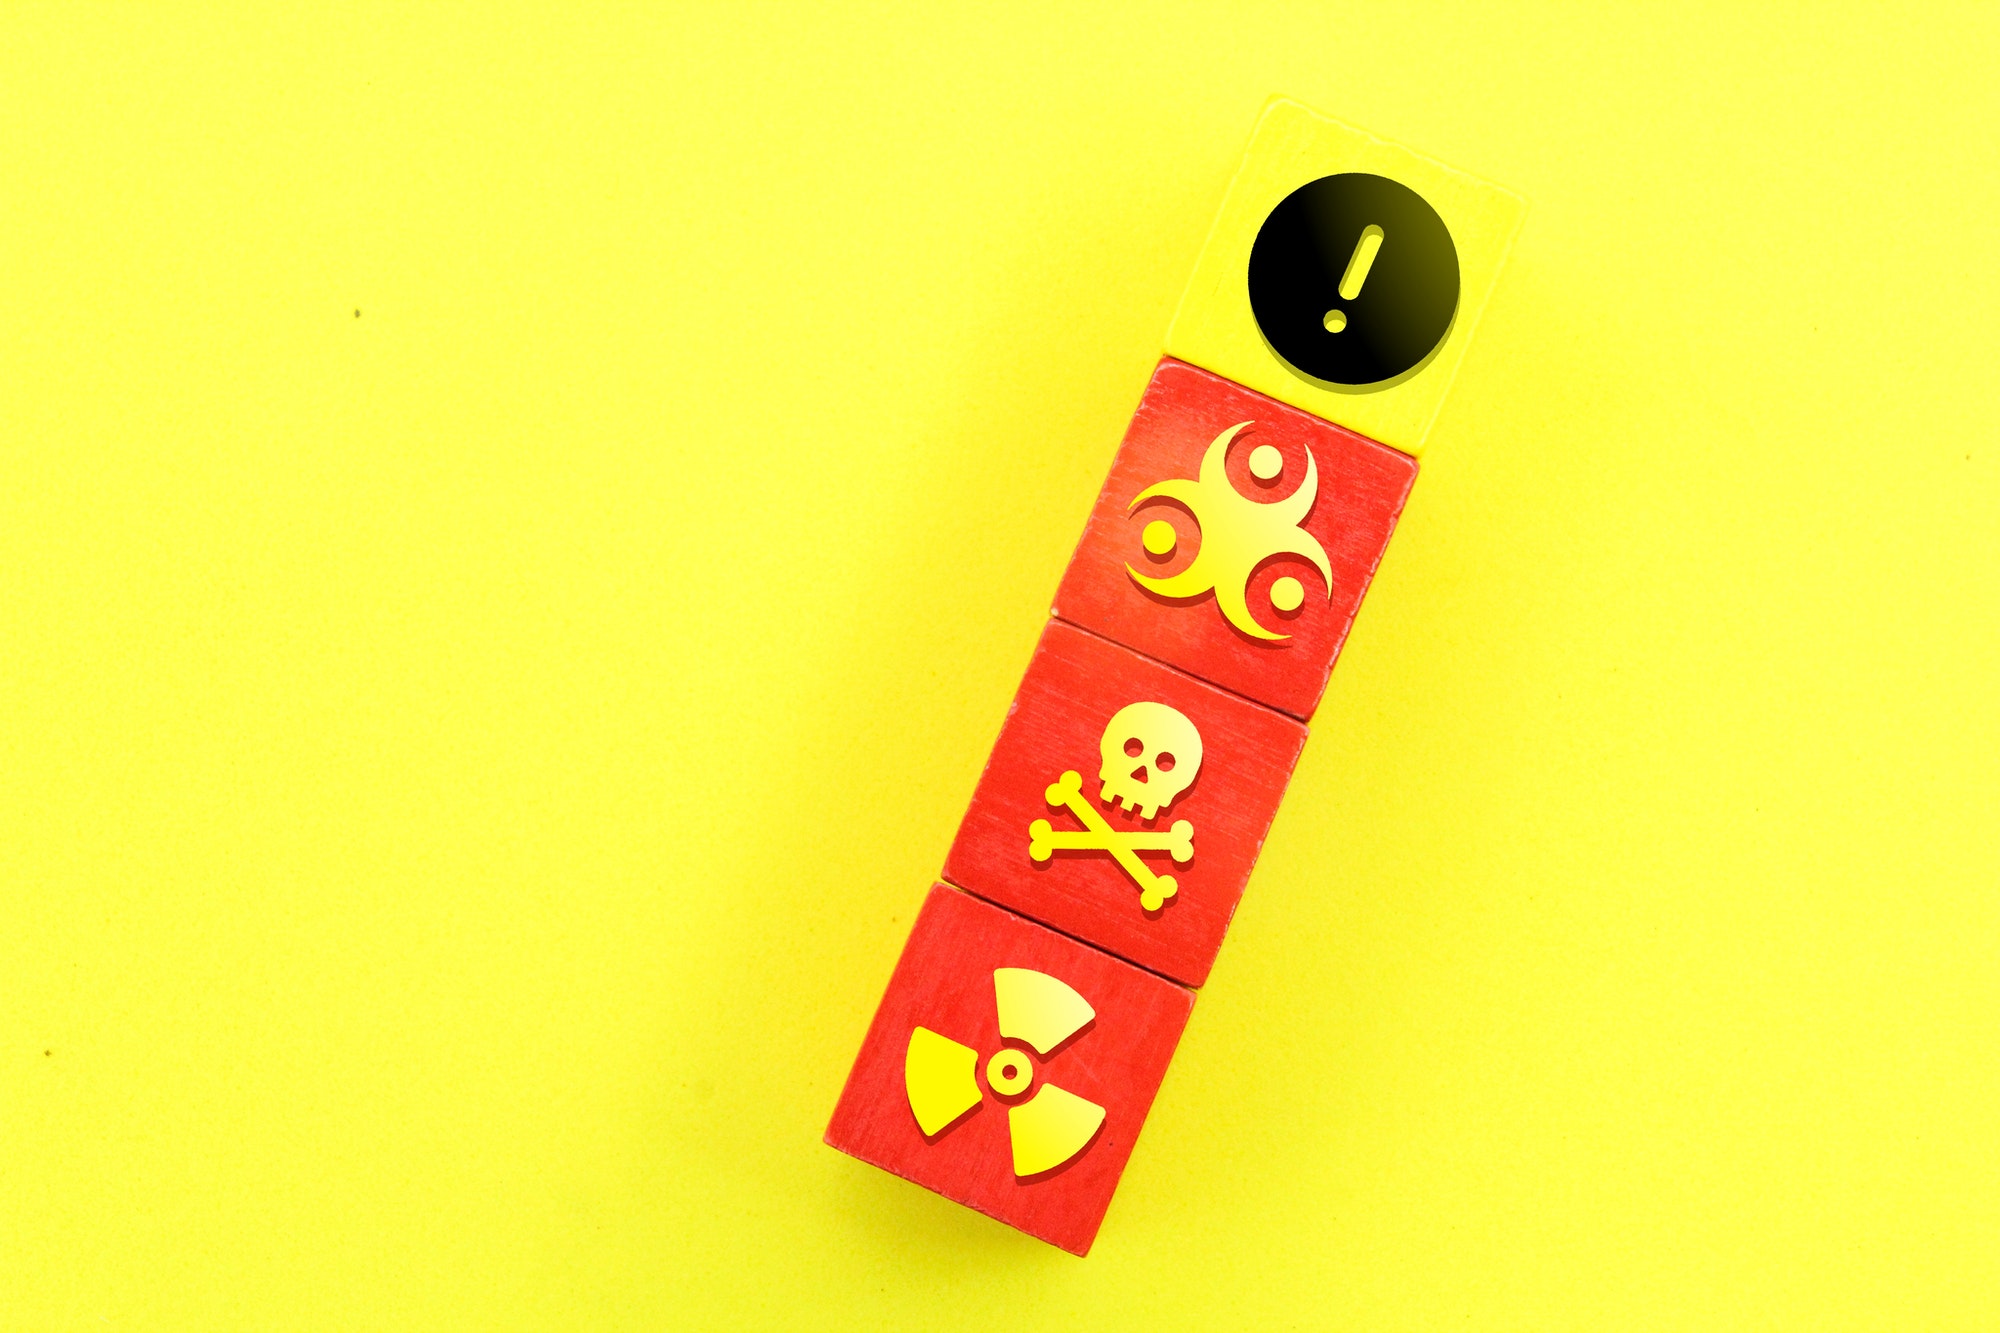 colored cubes with toxic or chemical icons and caution